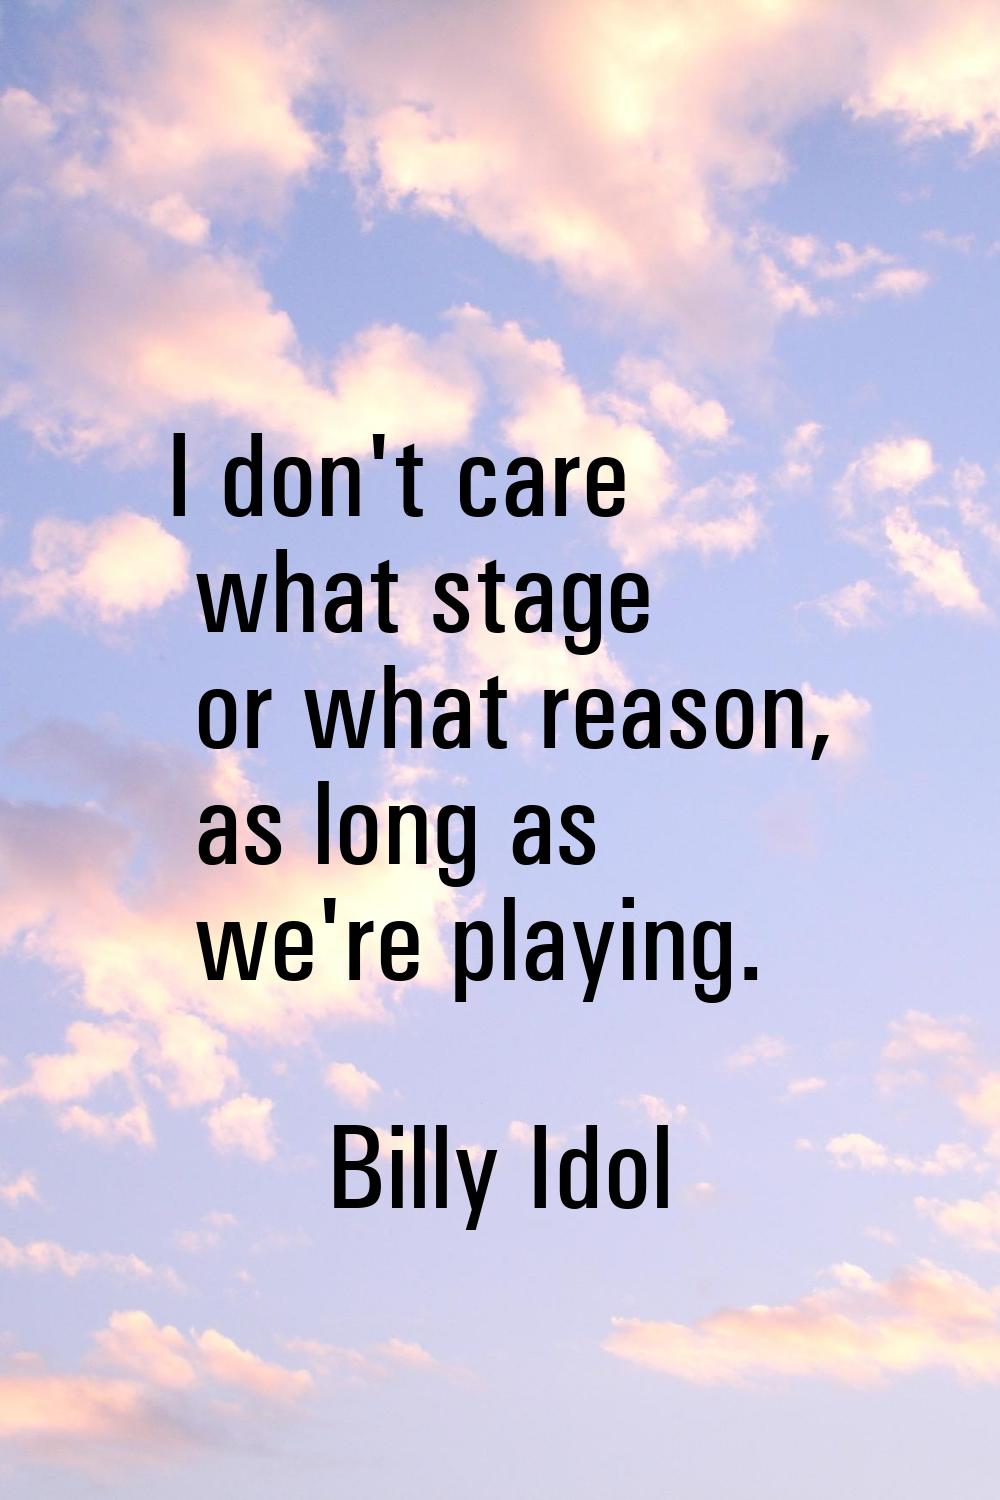 I don't care what stage or what reason, as long as we're playing.